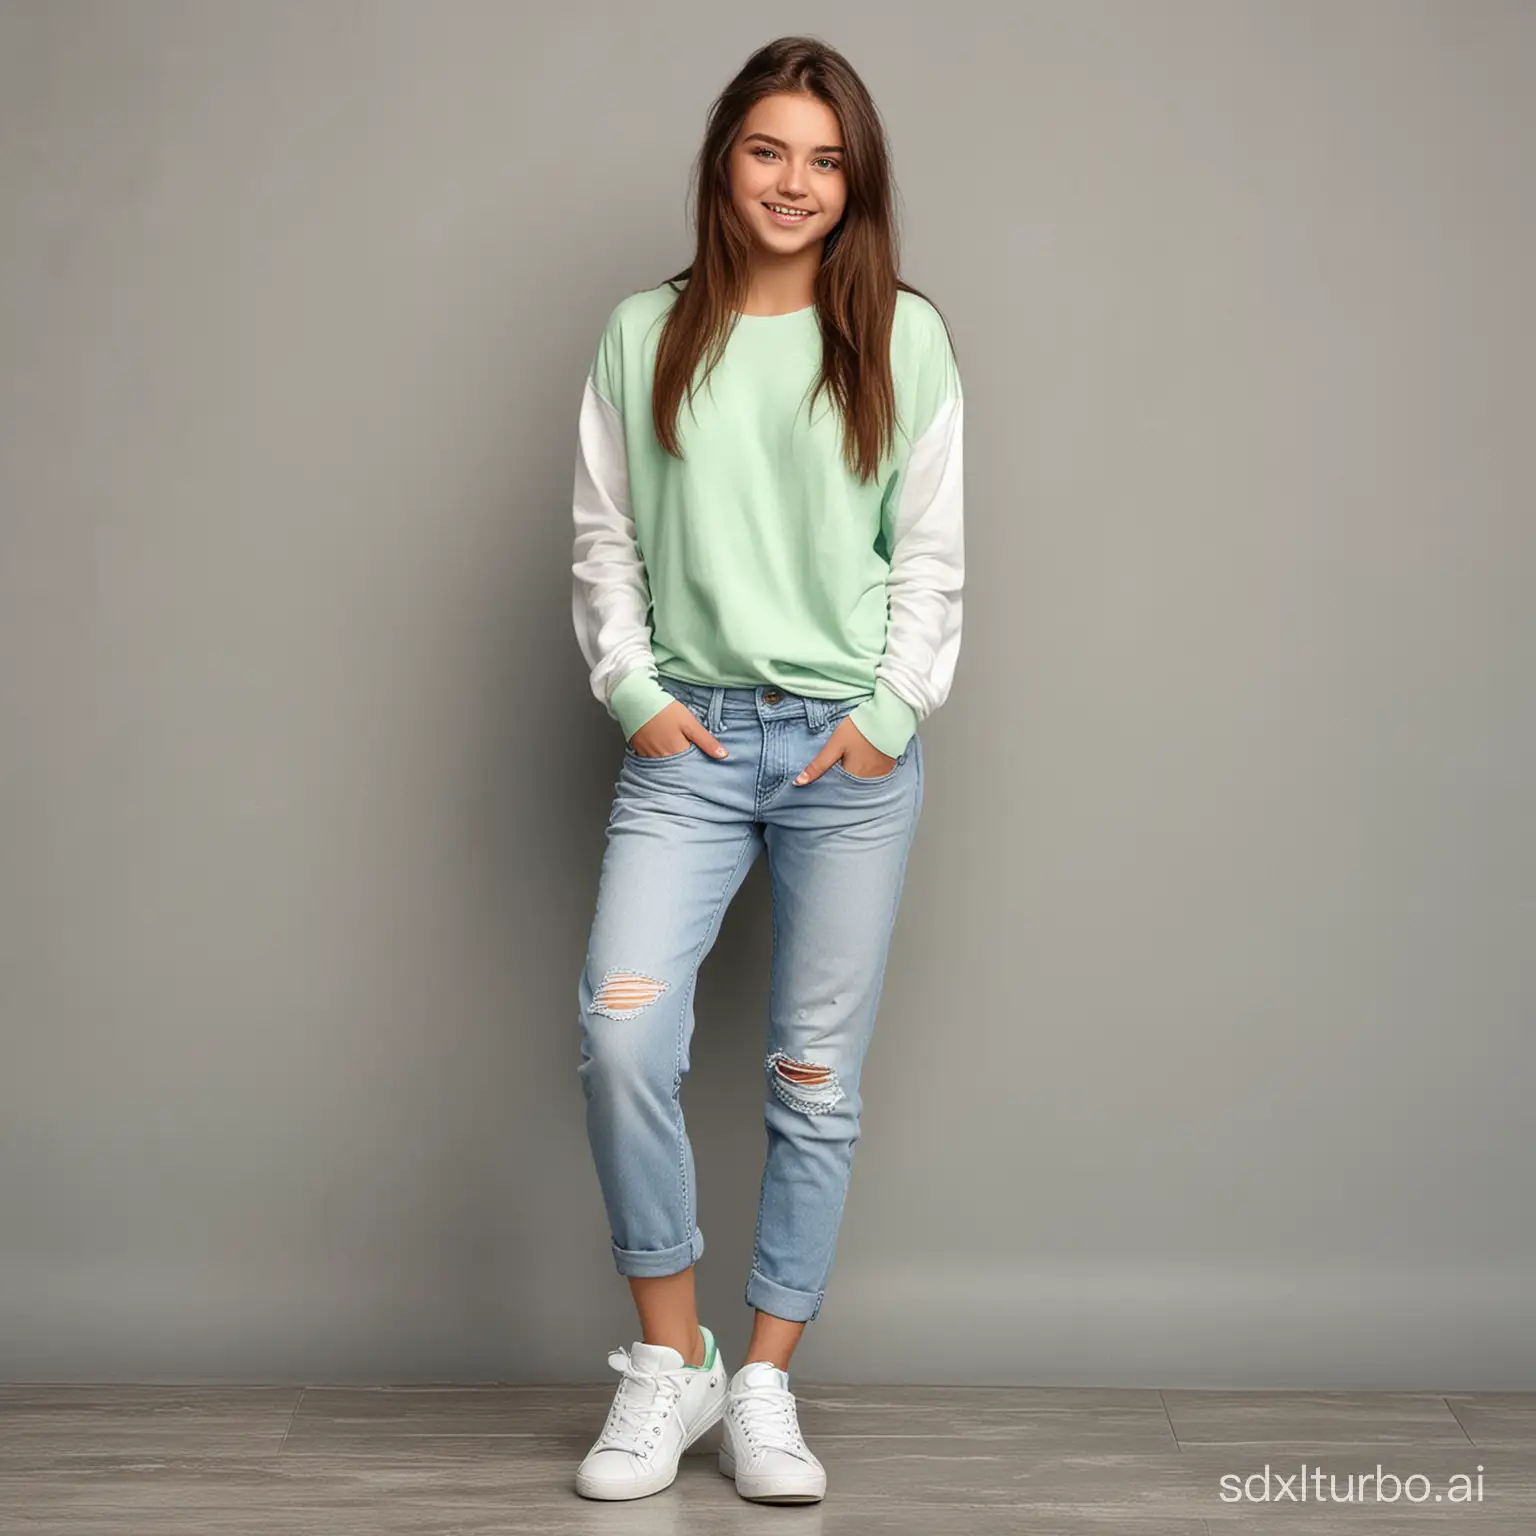 (realistic) beautiful 15 year old teenager with green eyes smiling at the camera, white sneakers, full body